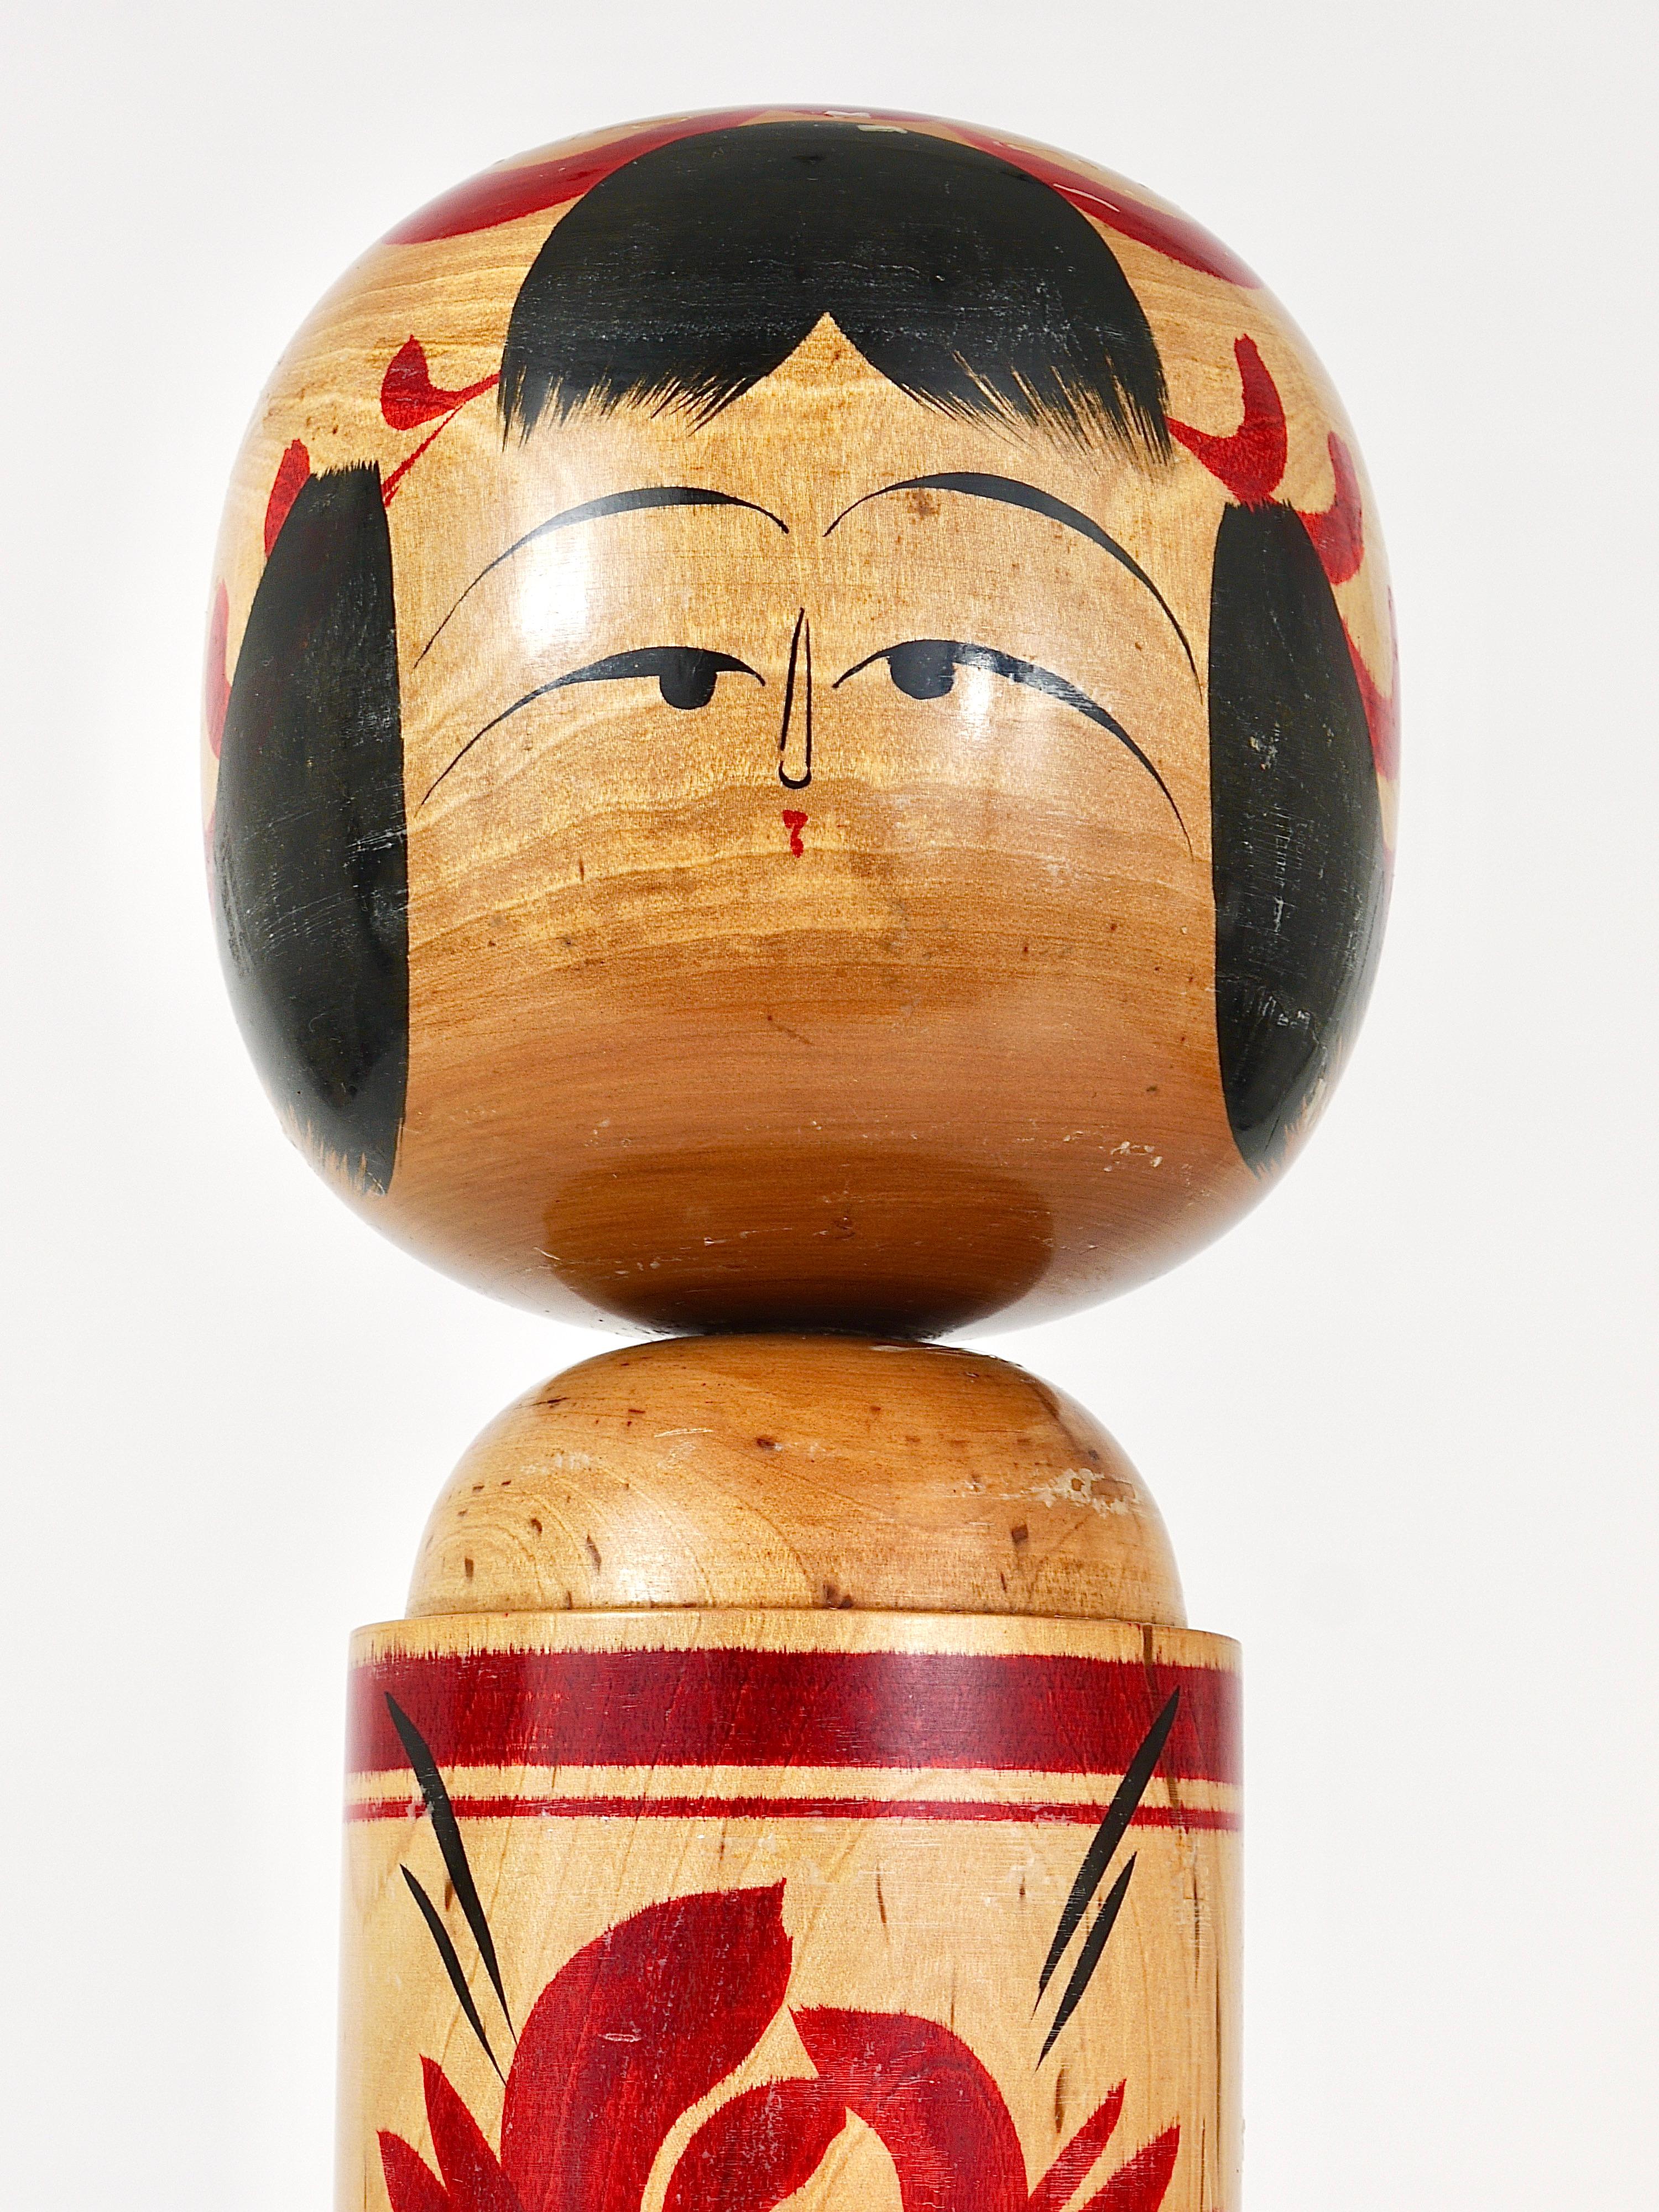 Edo Decorative Kokeshi Doll Sculpture from Northern Japan, Hand-Painted, Signed